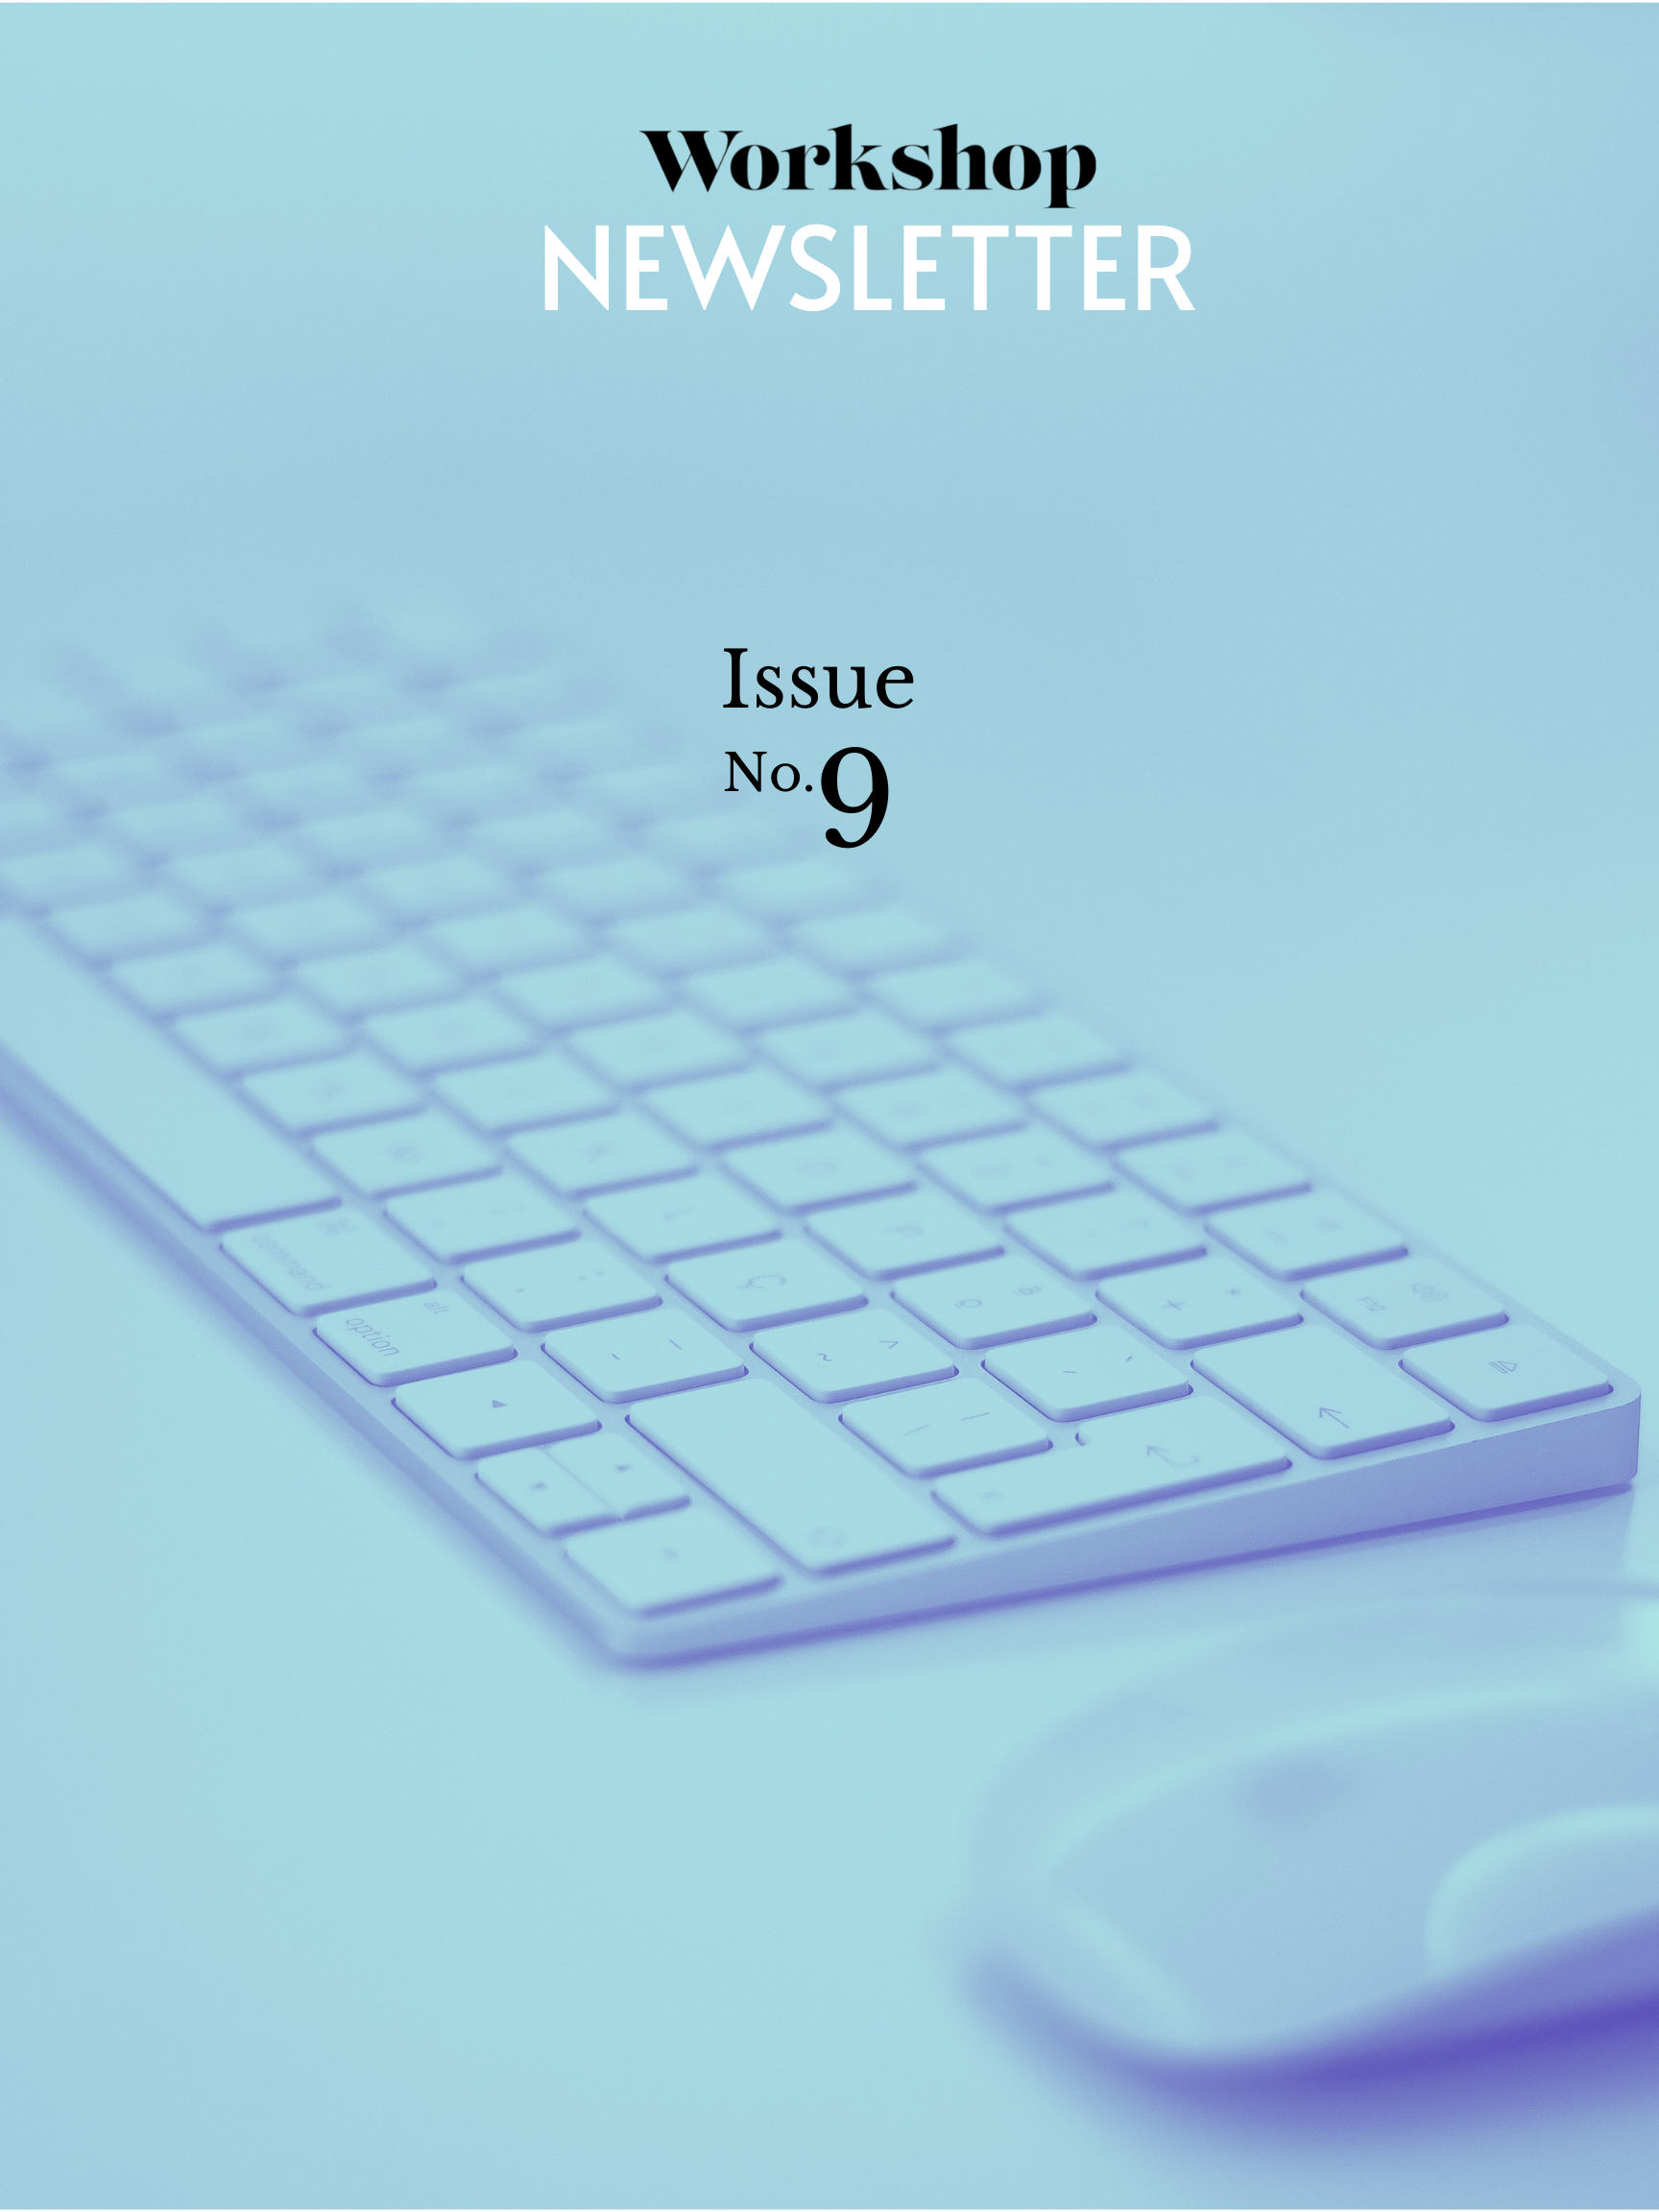 A photo of a mouse and keyboard overlaid in blue, with the words "Workshop newsletter: Issue No. 9